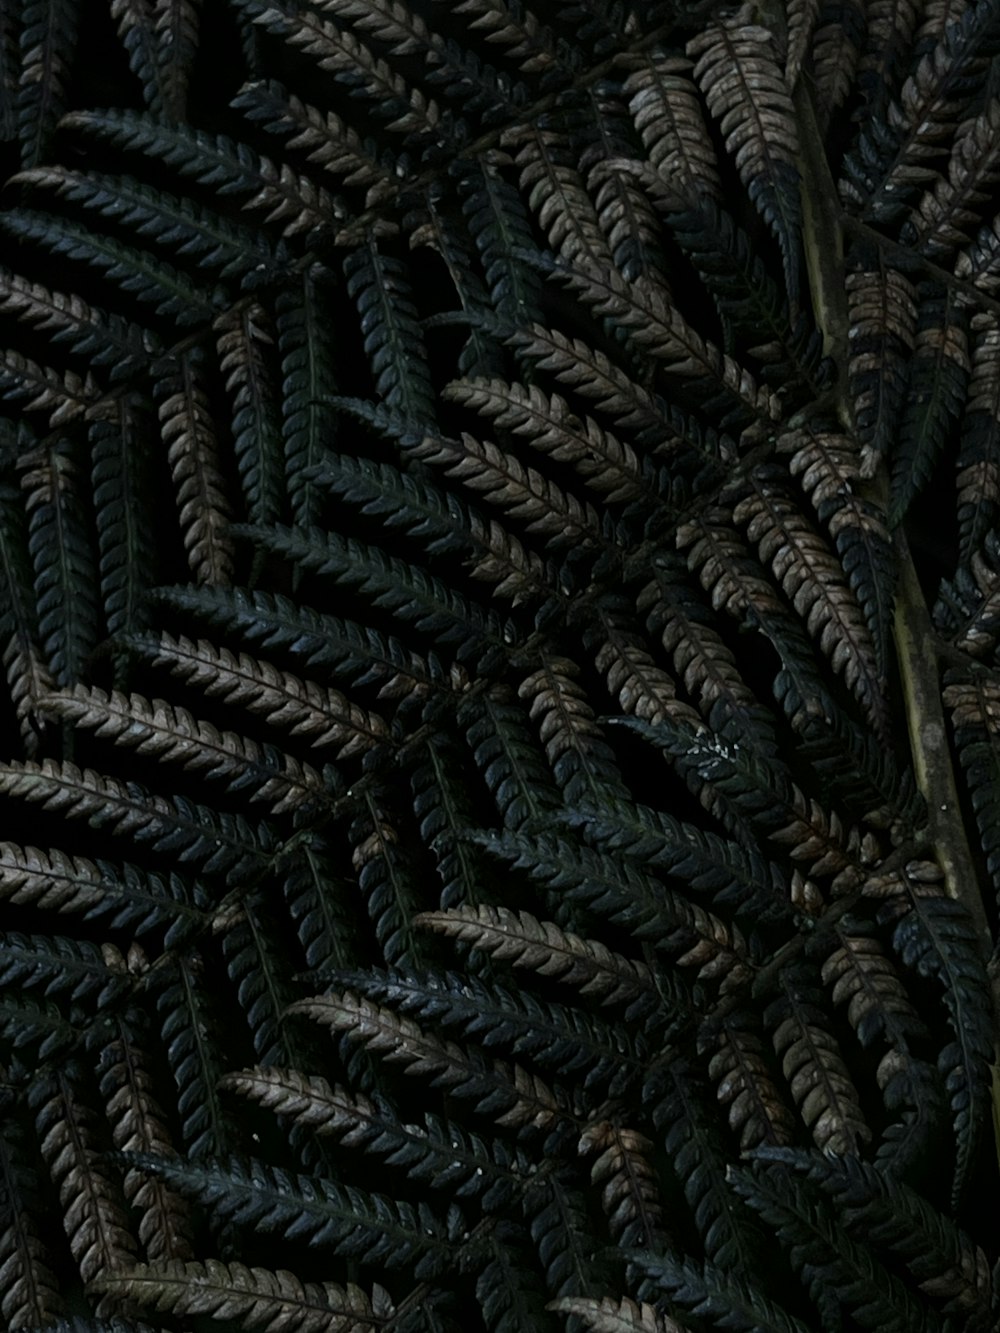 a close up view of a bunch of rope